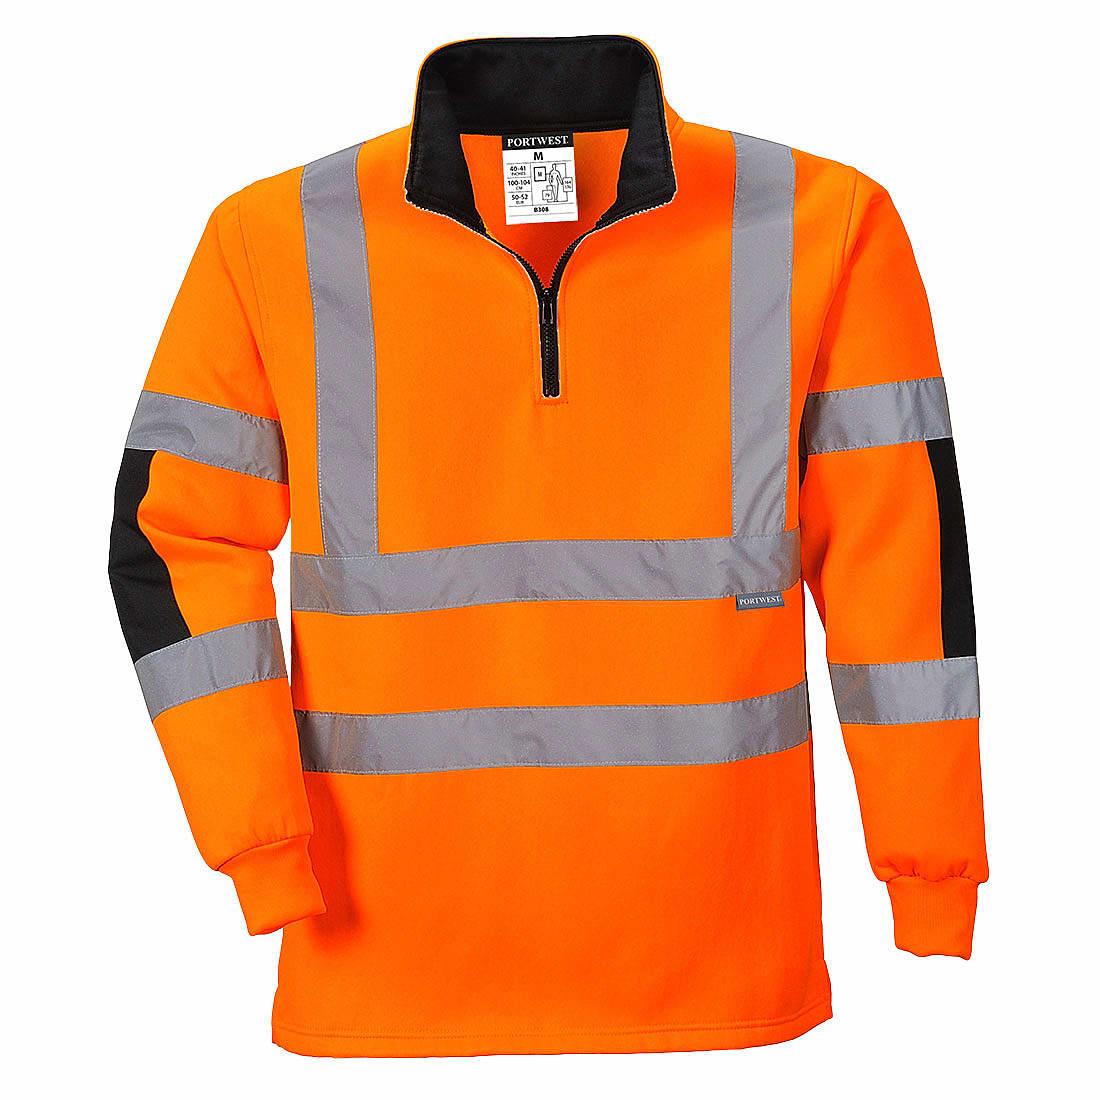 Portwest Xenon Rugby Shirt in Orange (Product Code: B308)